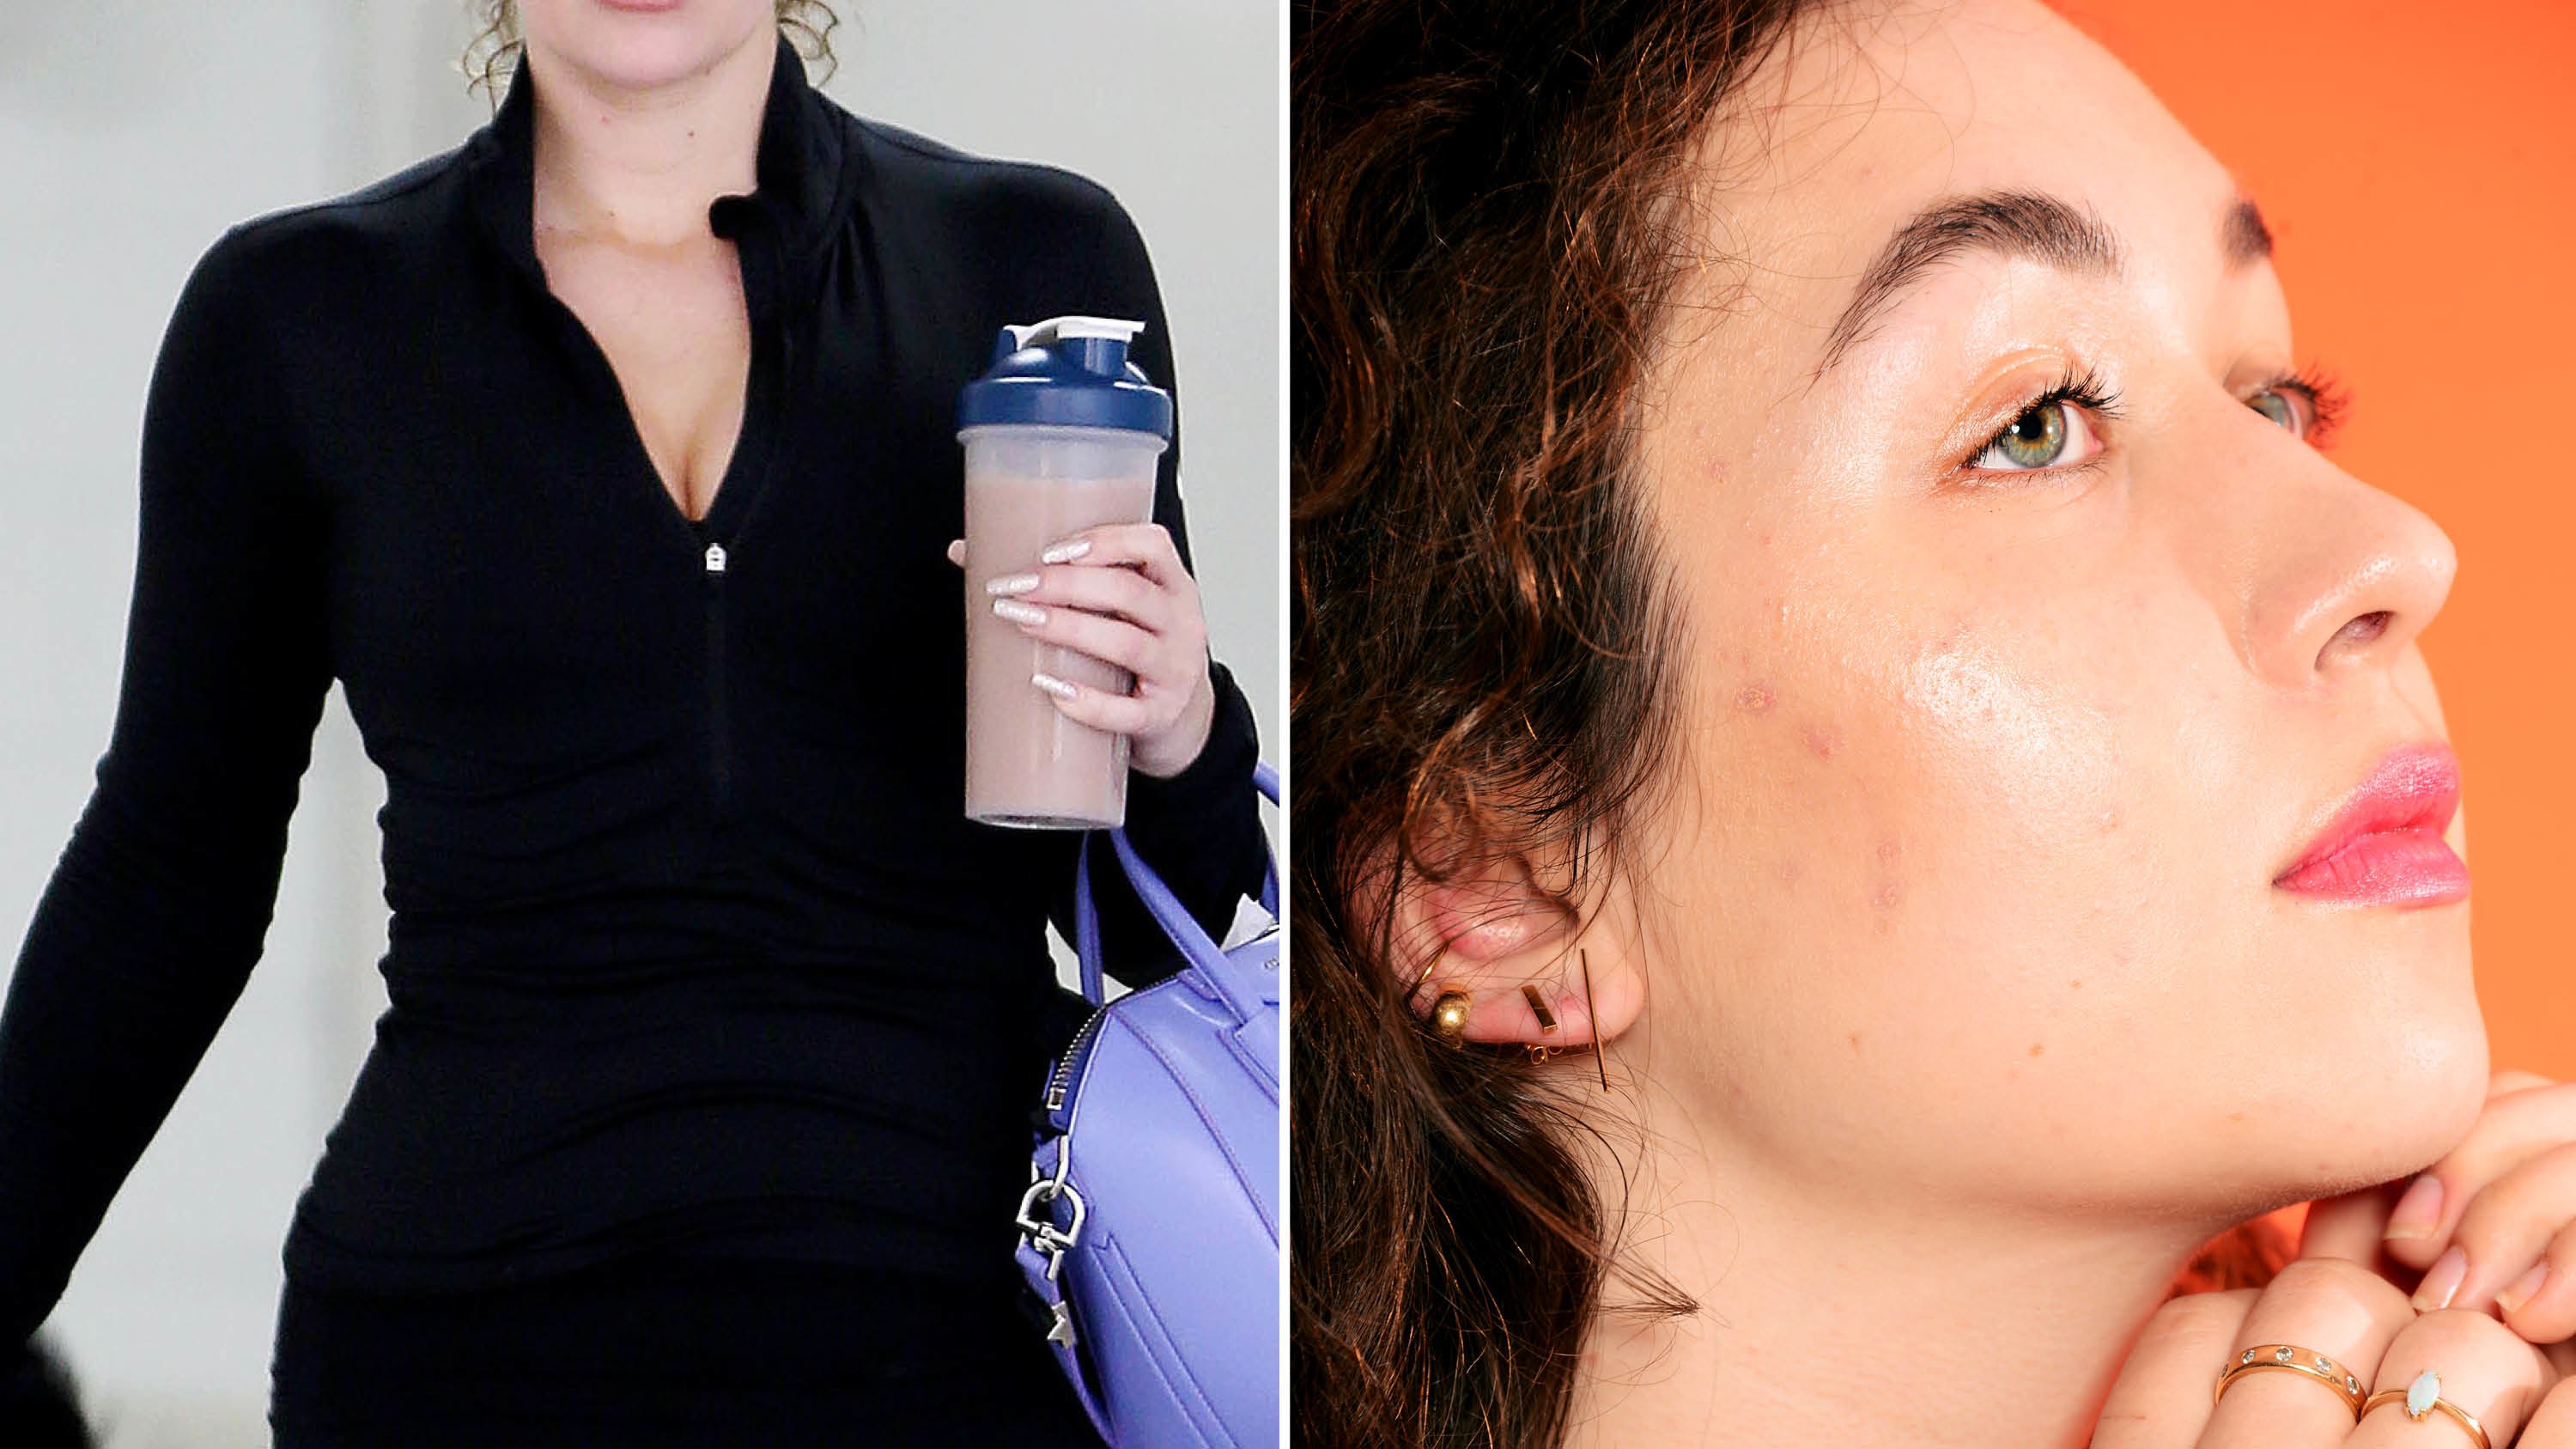 Does Whey Protein Cause Acne? The Correlation Between Breakouts and Protein Shakes